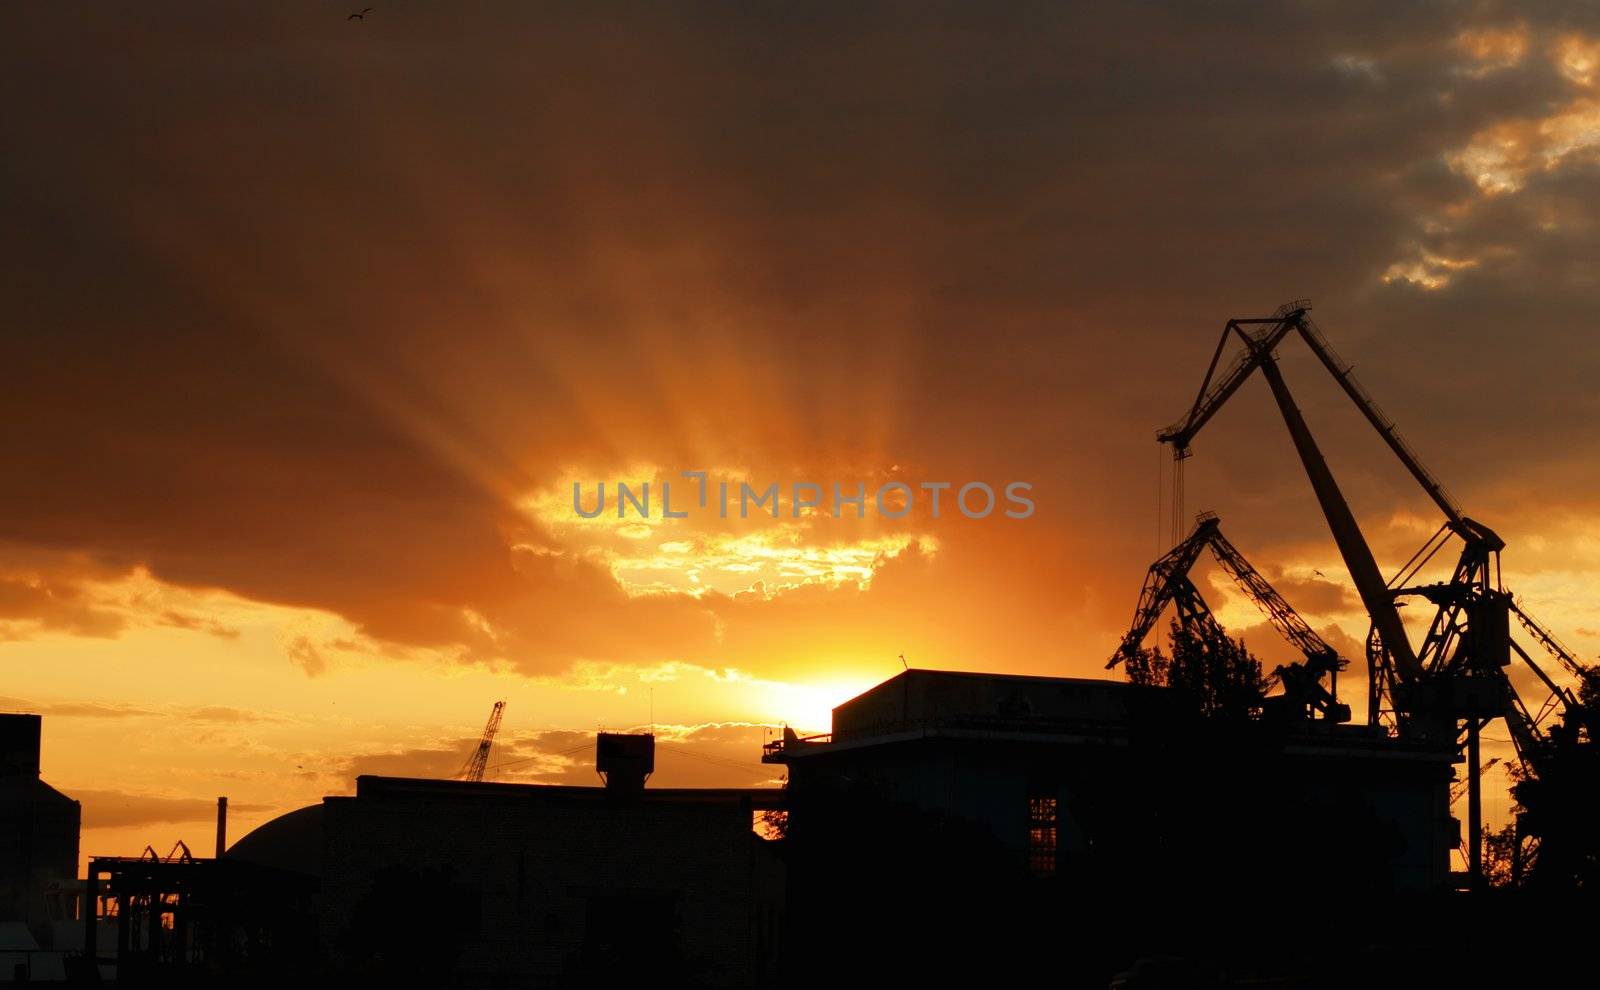 Sunset upon an industrial scene